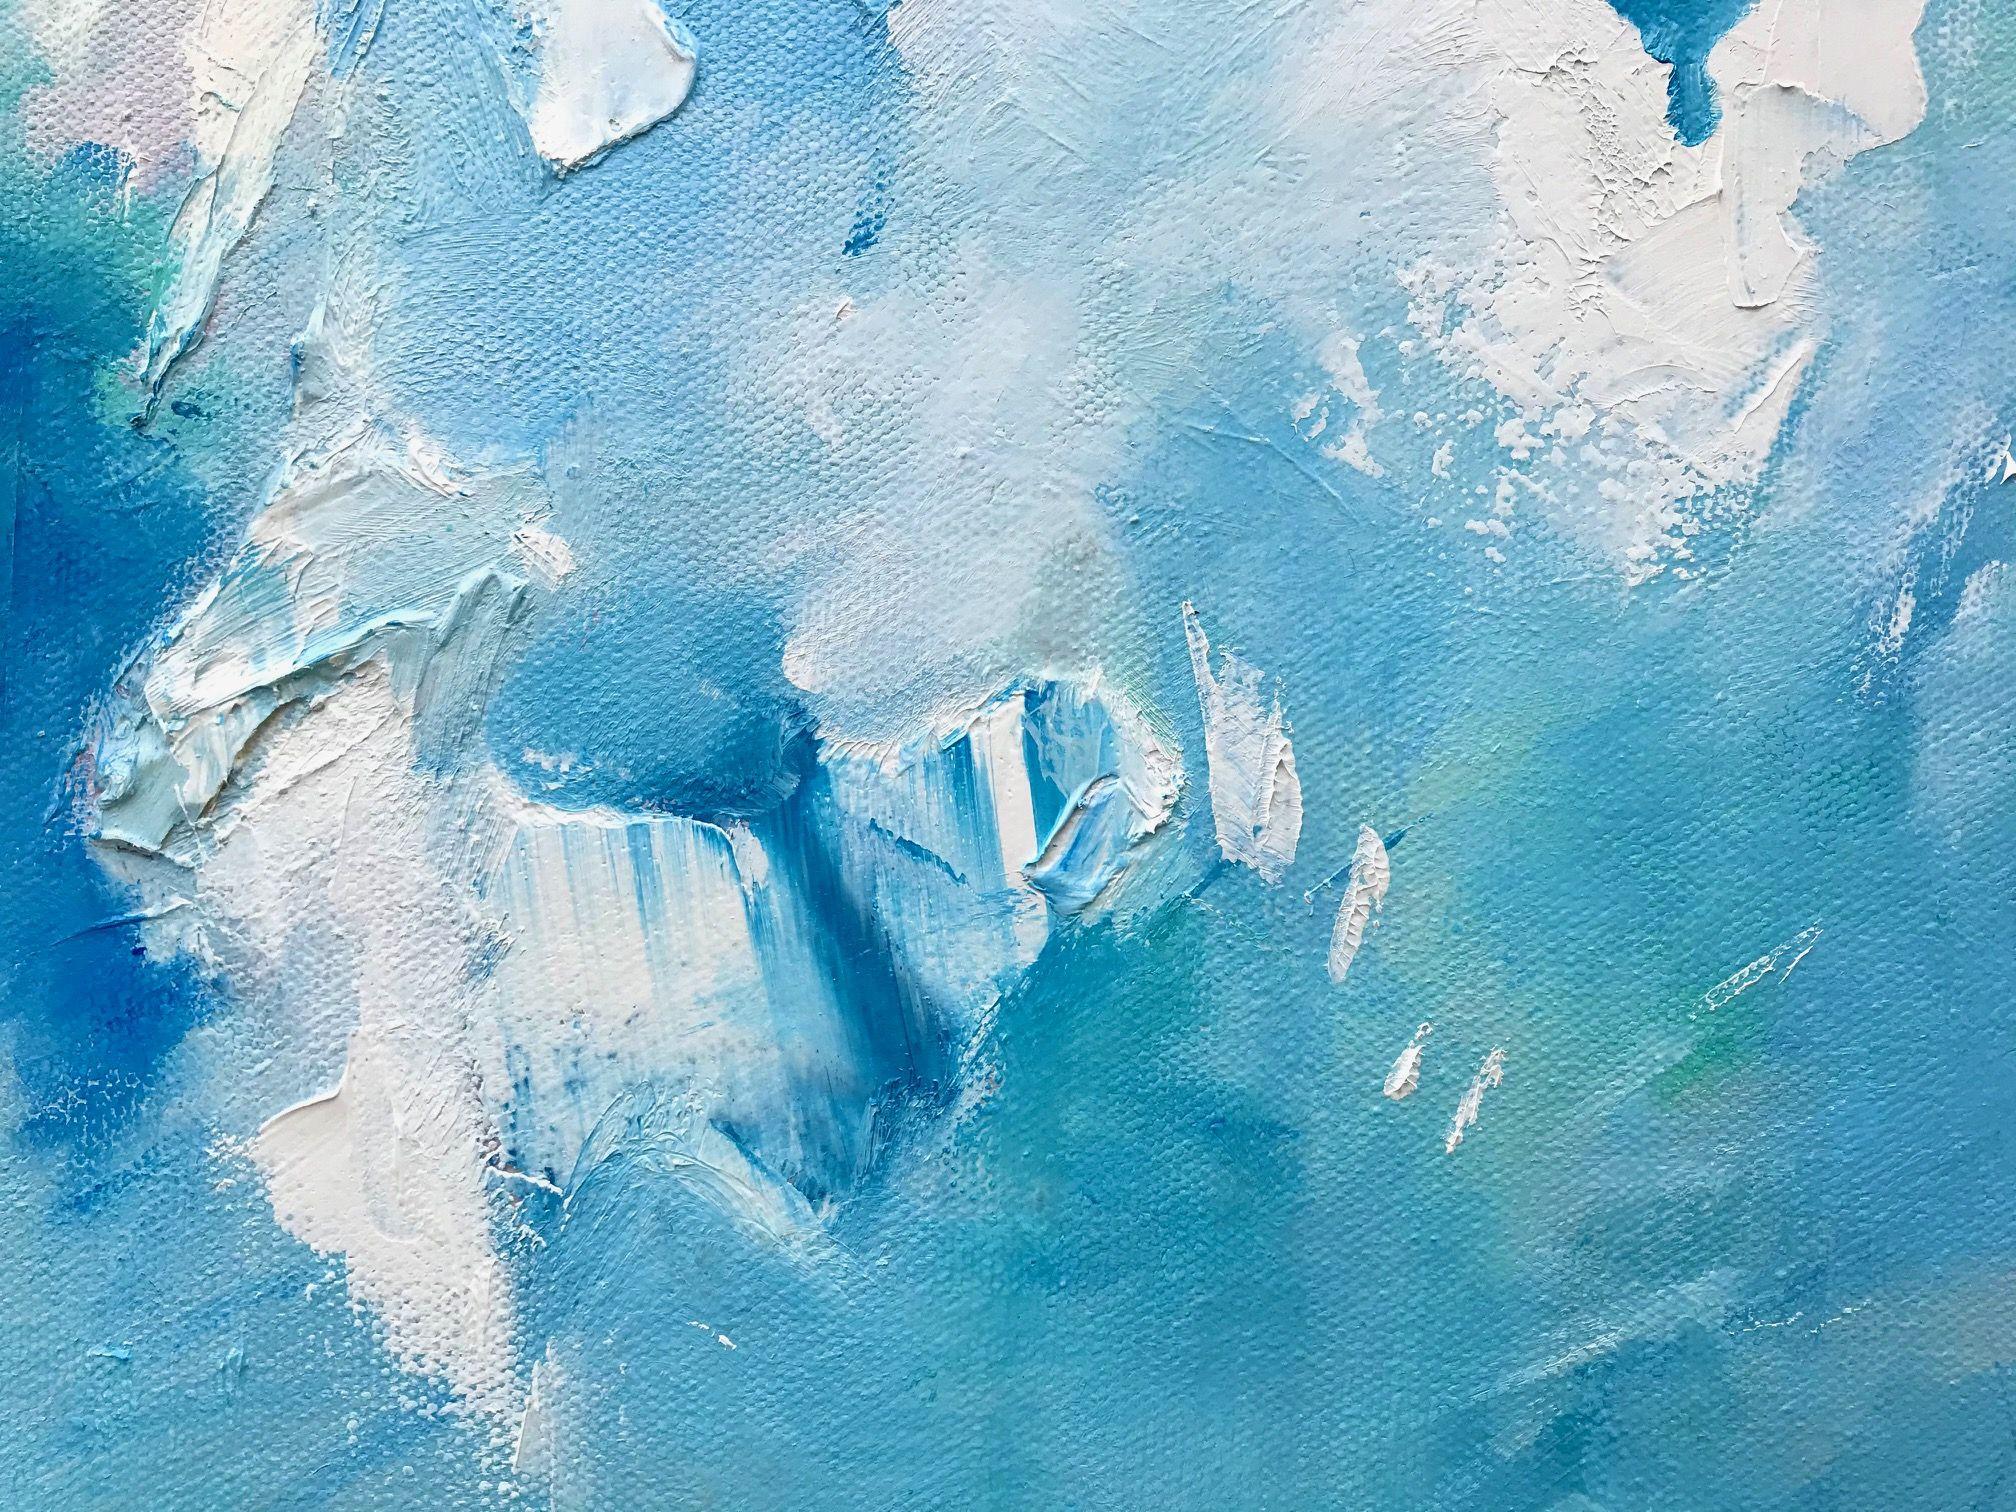 Cliff Dive, Painting, Oil on Canvas - Blue Abstract Painting by Nicholas Kriefall